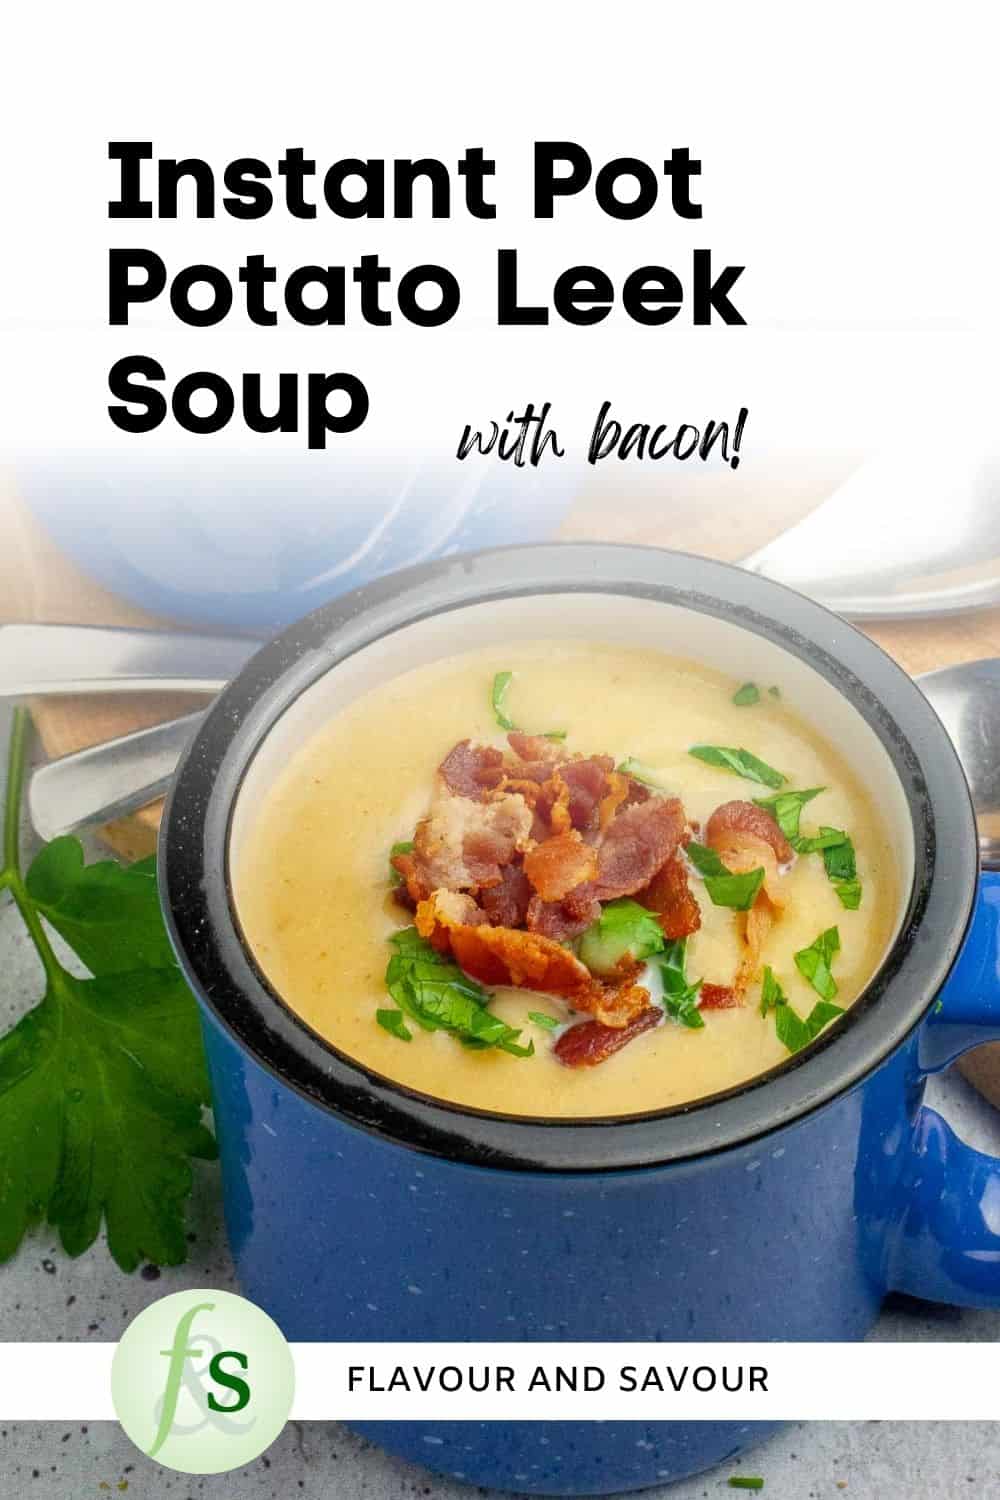 Image with text overlay for Instant Pot Potato Leek Soup with Bacon.